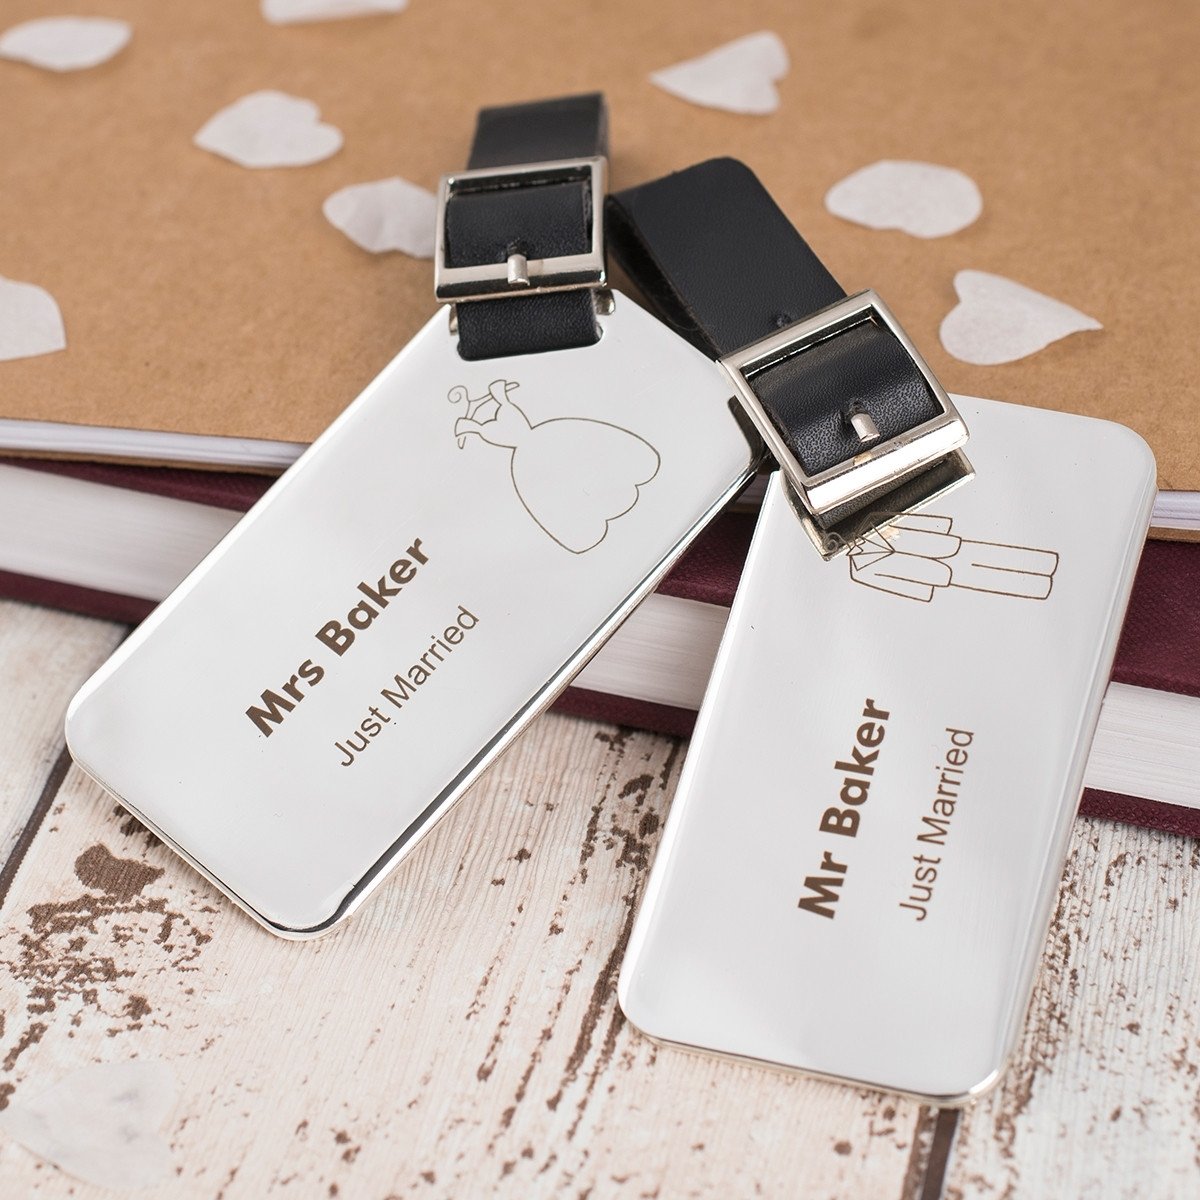 10 Fabulous Gift Ideas For Married Couples 2020